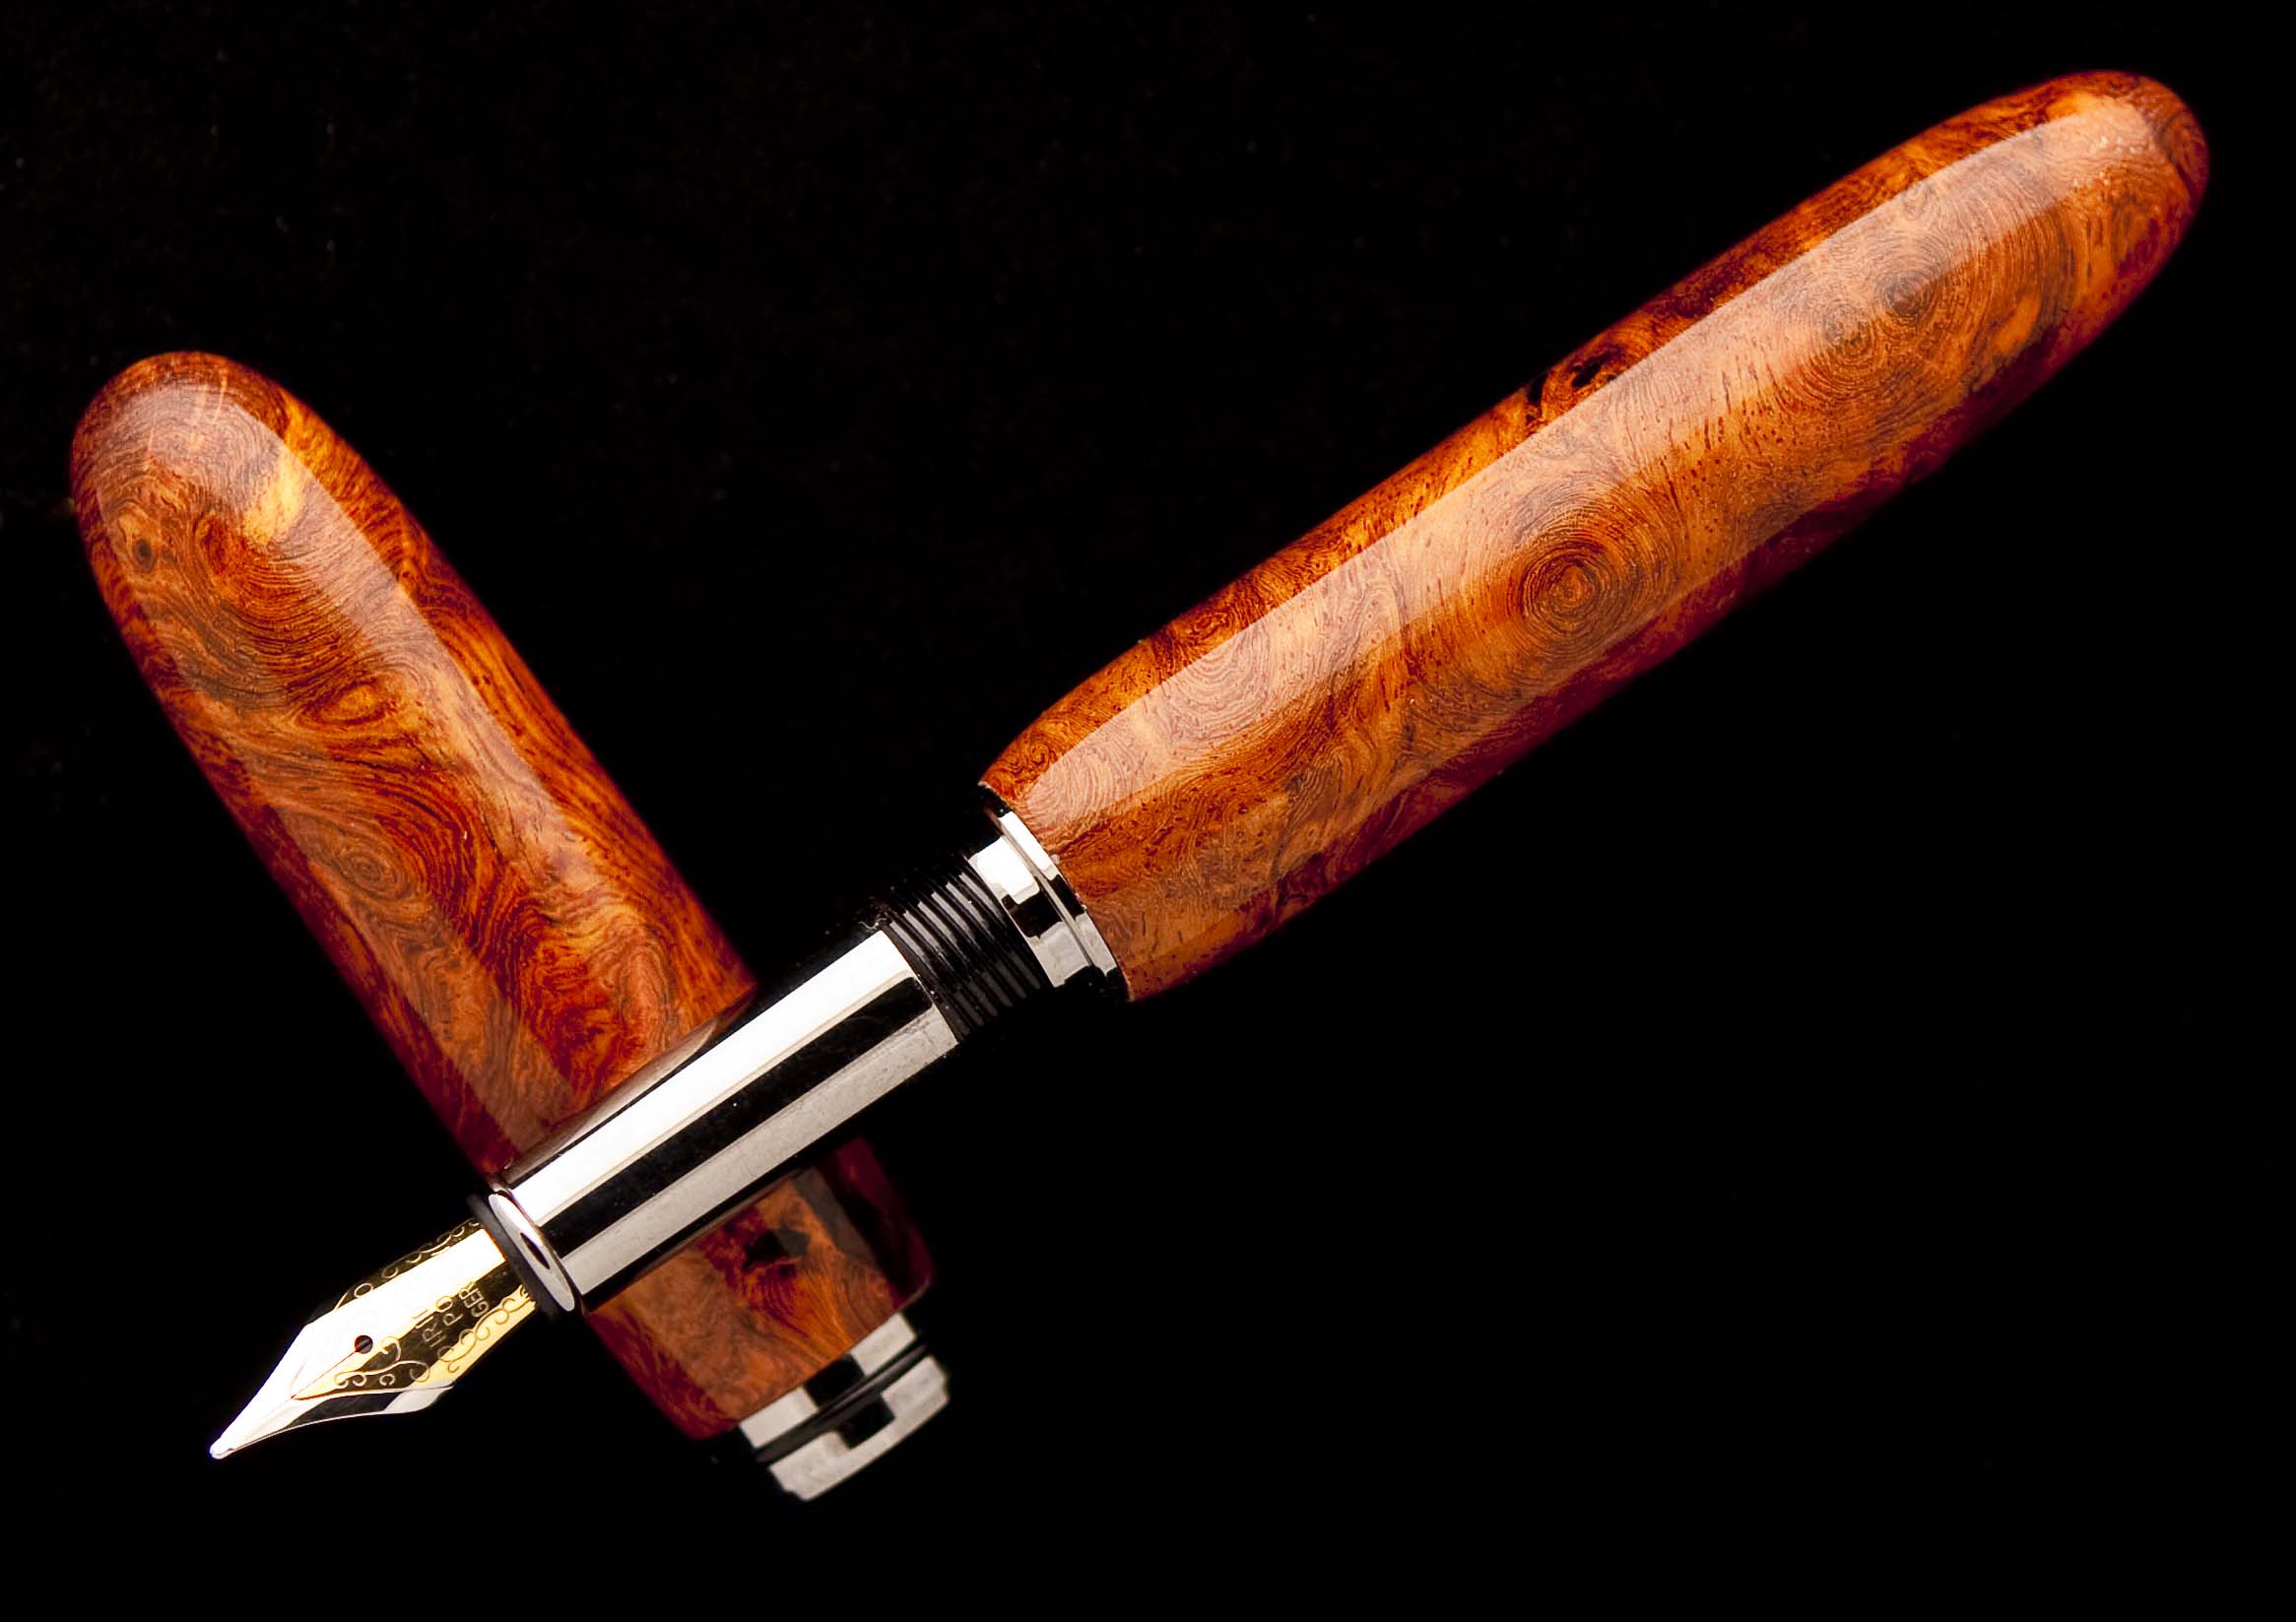 Revised Double Closed Ended Amboyna Burl Pen